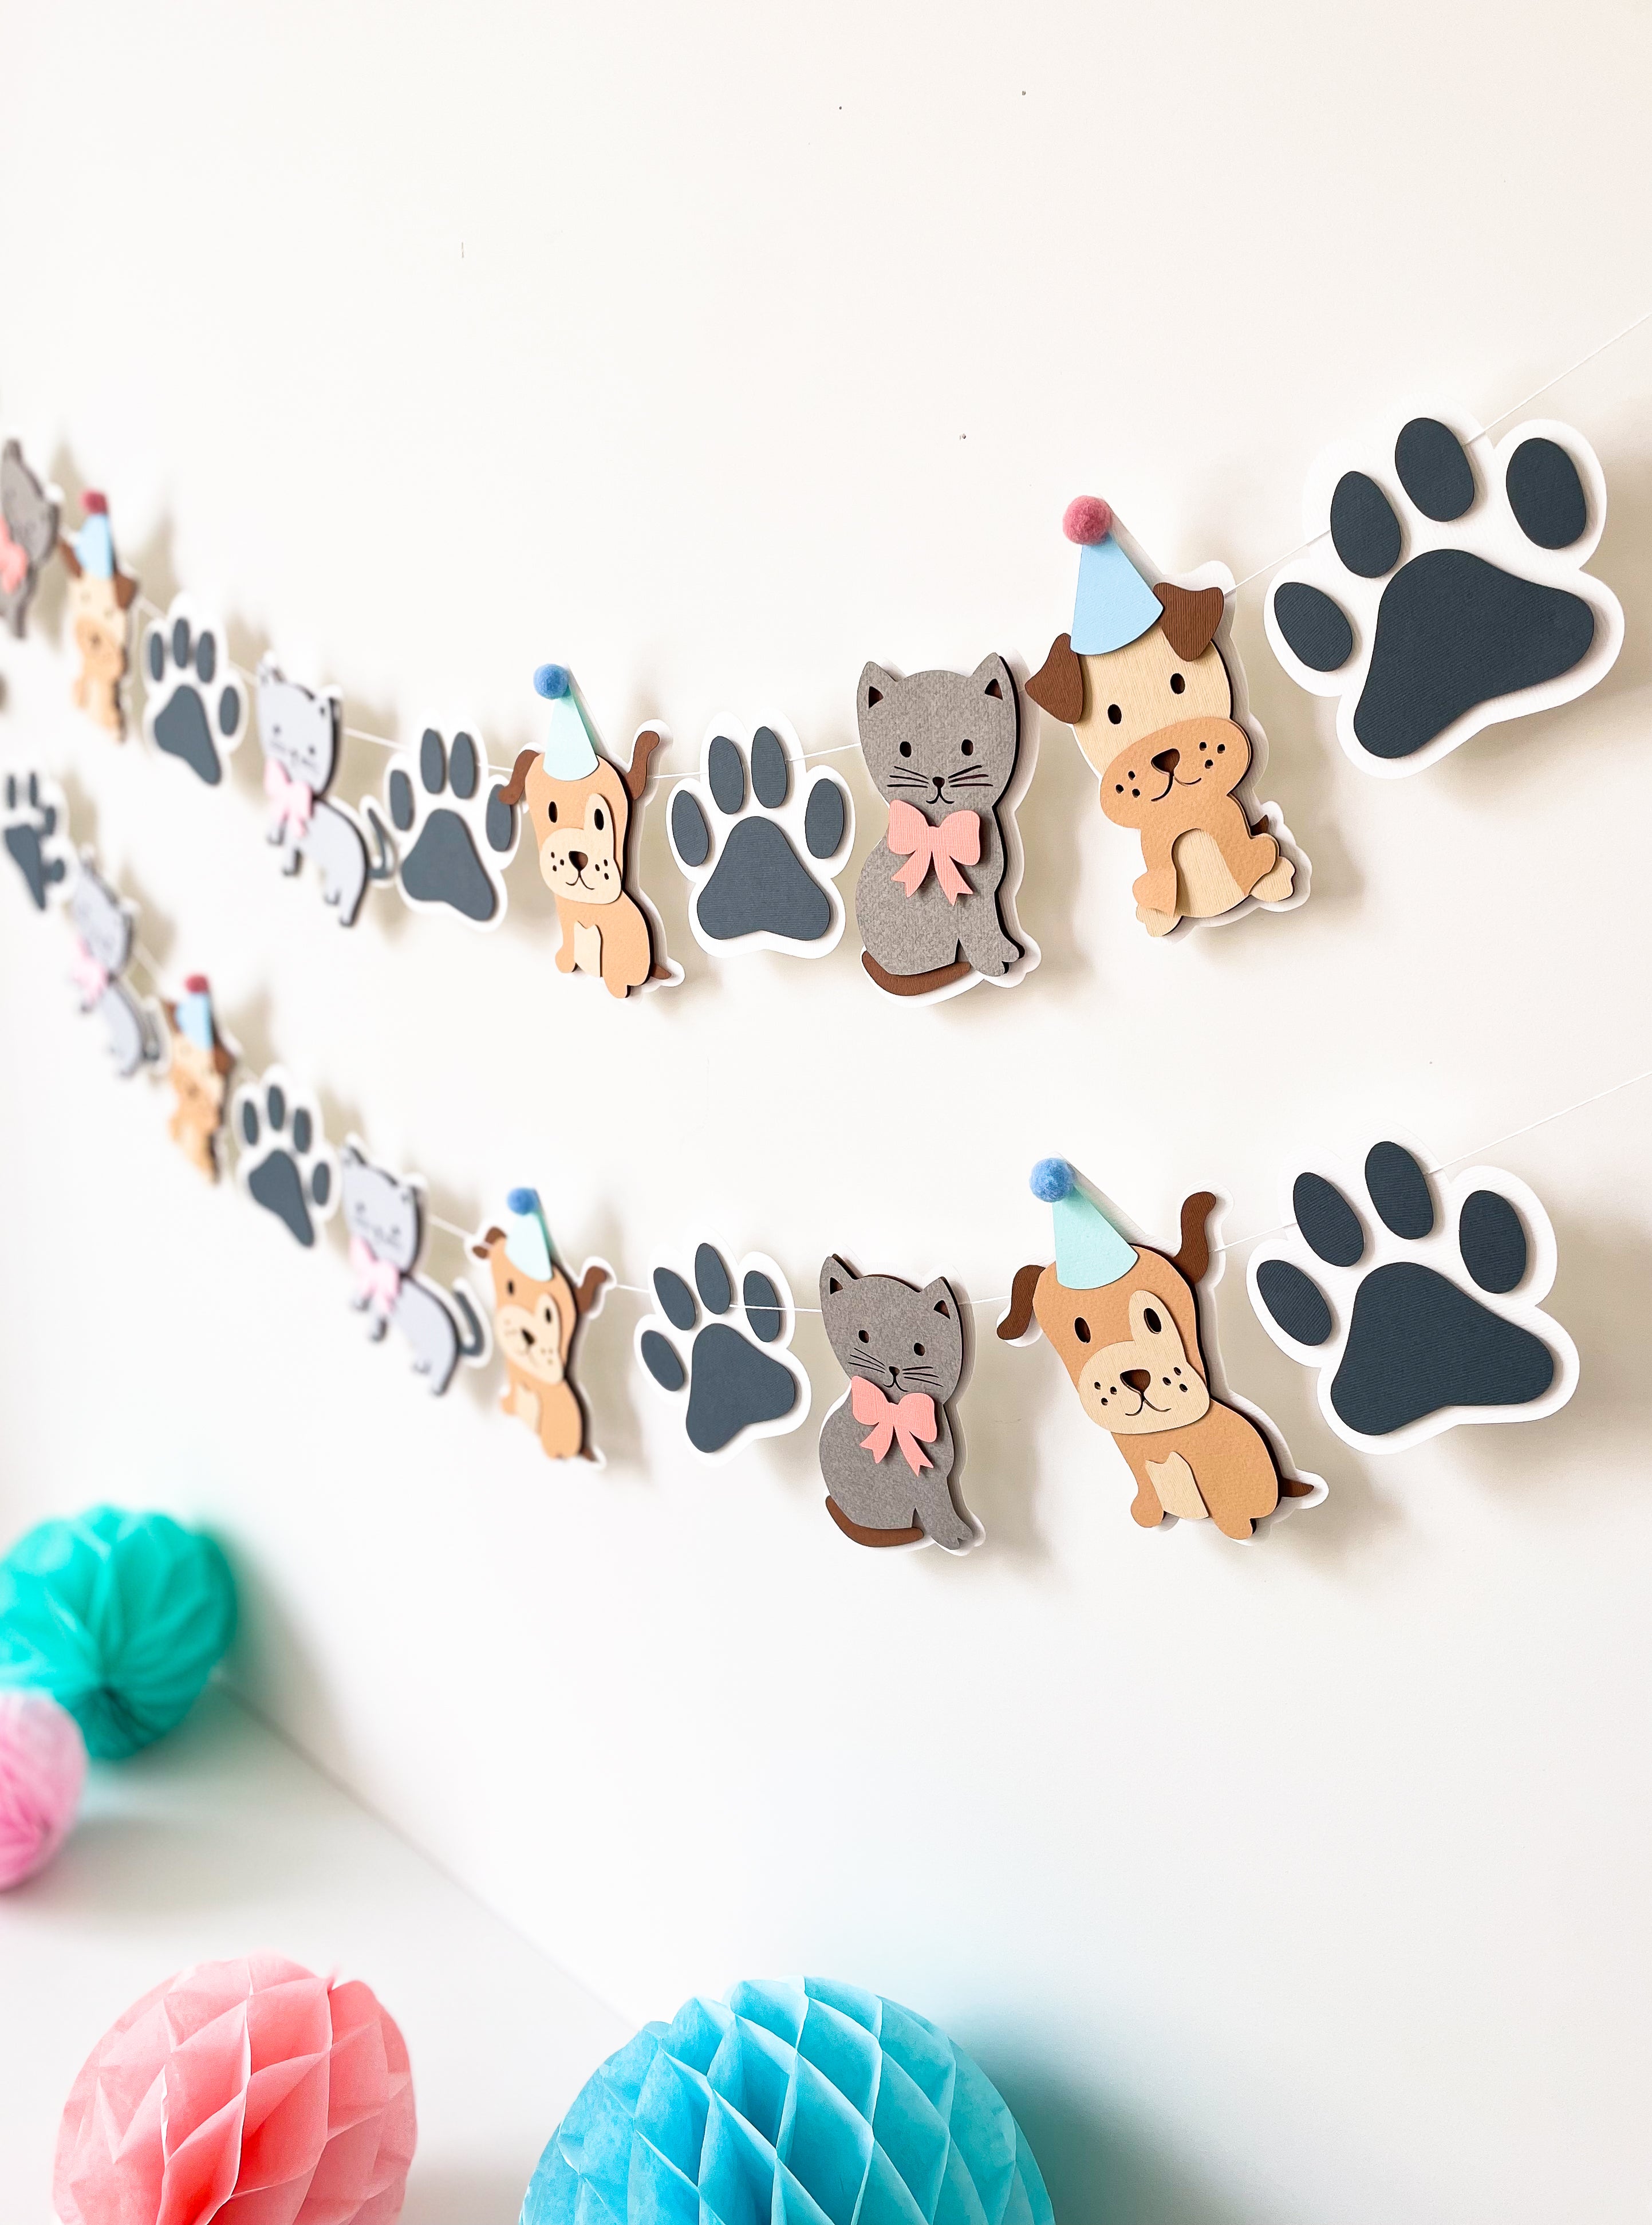 Dog and Cat Birthday Decorations Puppy Kitten Garland Pet Adoption Party Let's Pawty Puppies and Kitties Birthday Puppy Themed Adopt a Puppy